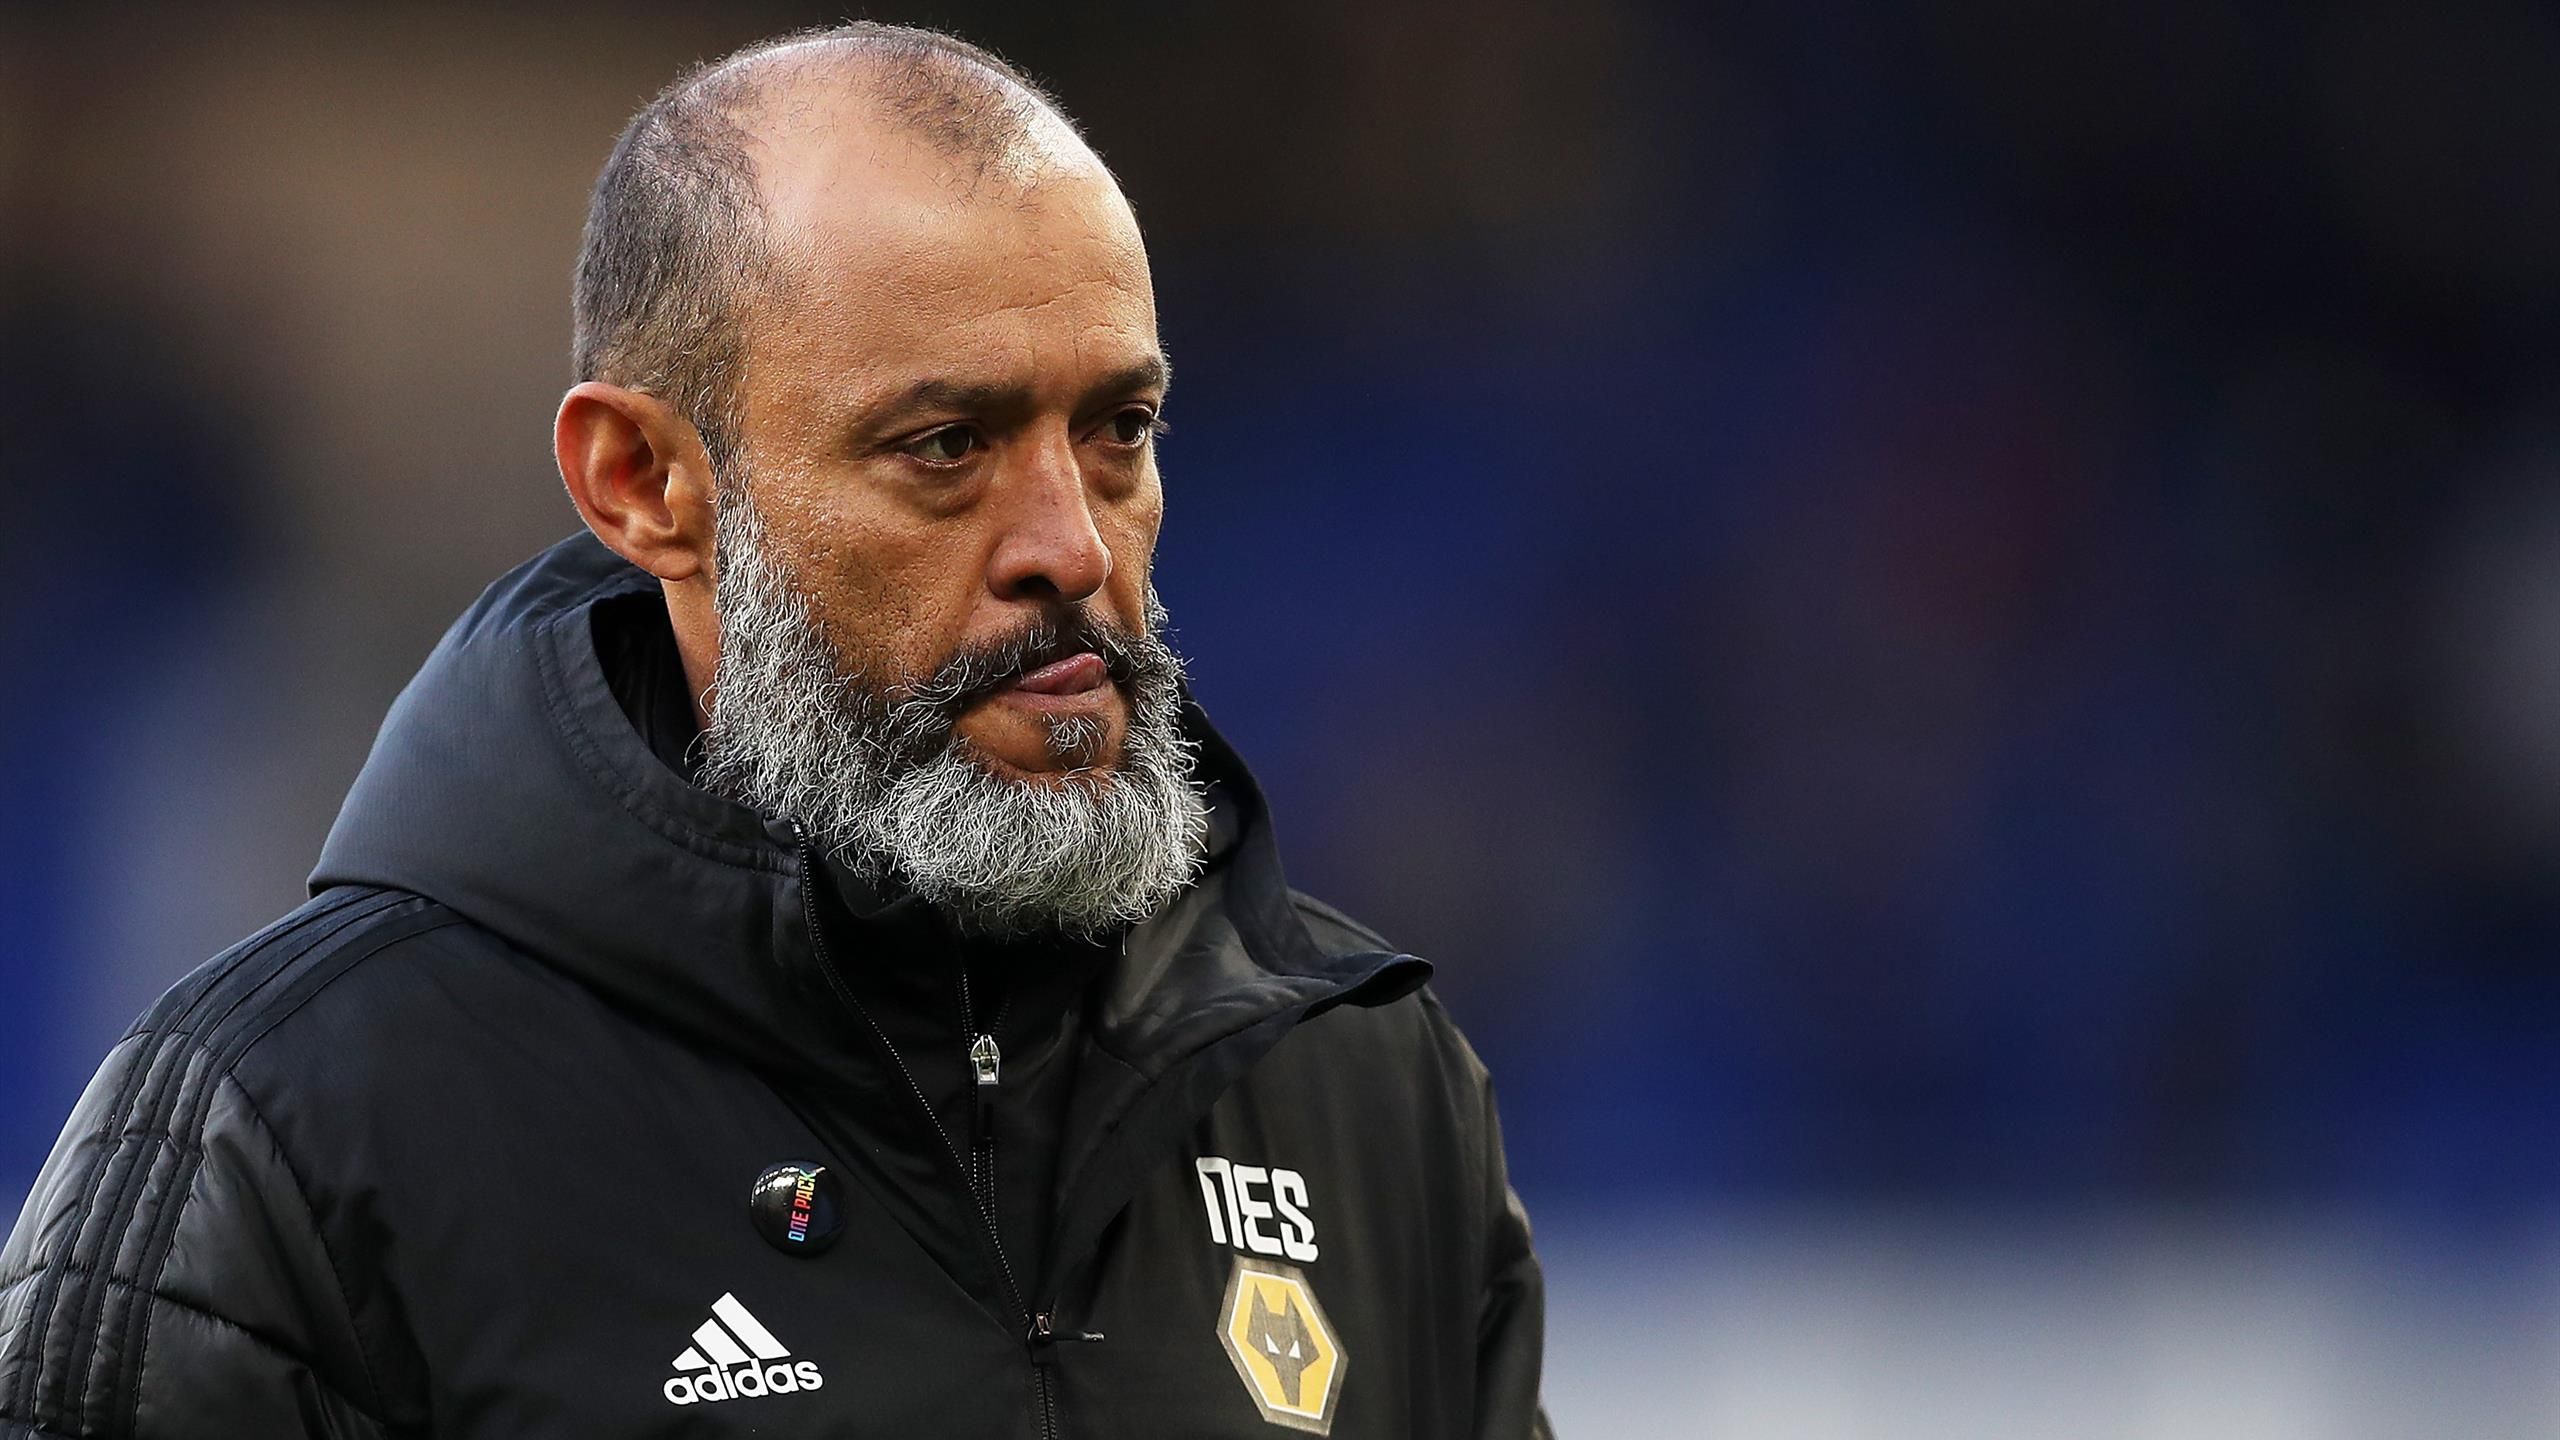 Wolves head coach Nuno Espirito Santo to leave the Premier League club after Sunday's final game of the season